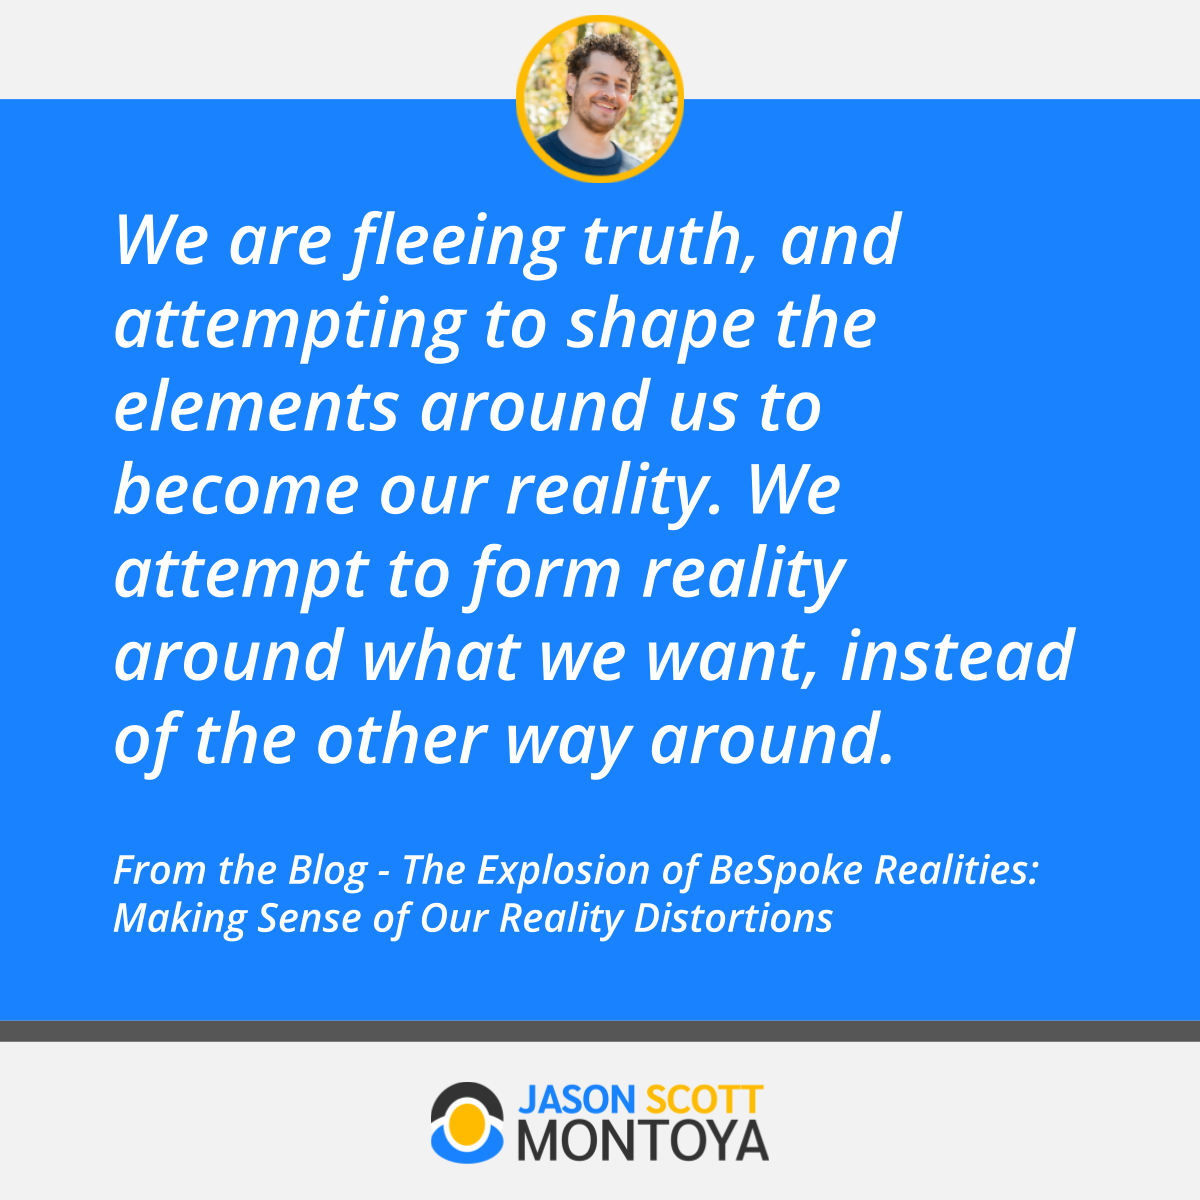 We are fleeing truth, and attempting to shape the elements around us to become our reality. We attempt to form reality around what we want, instead of the other way around.  From the Blog - The Explosion of BeSpoke Realities: Making Sense of Our Reality Distortions